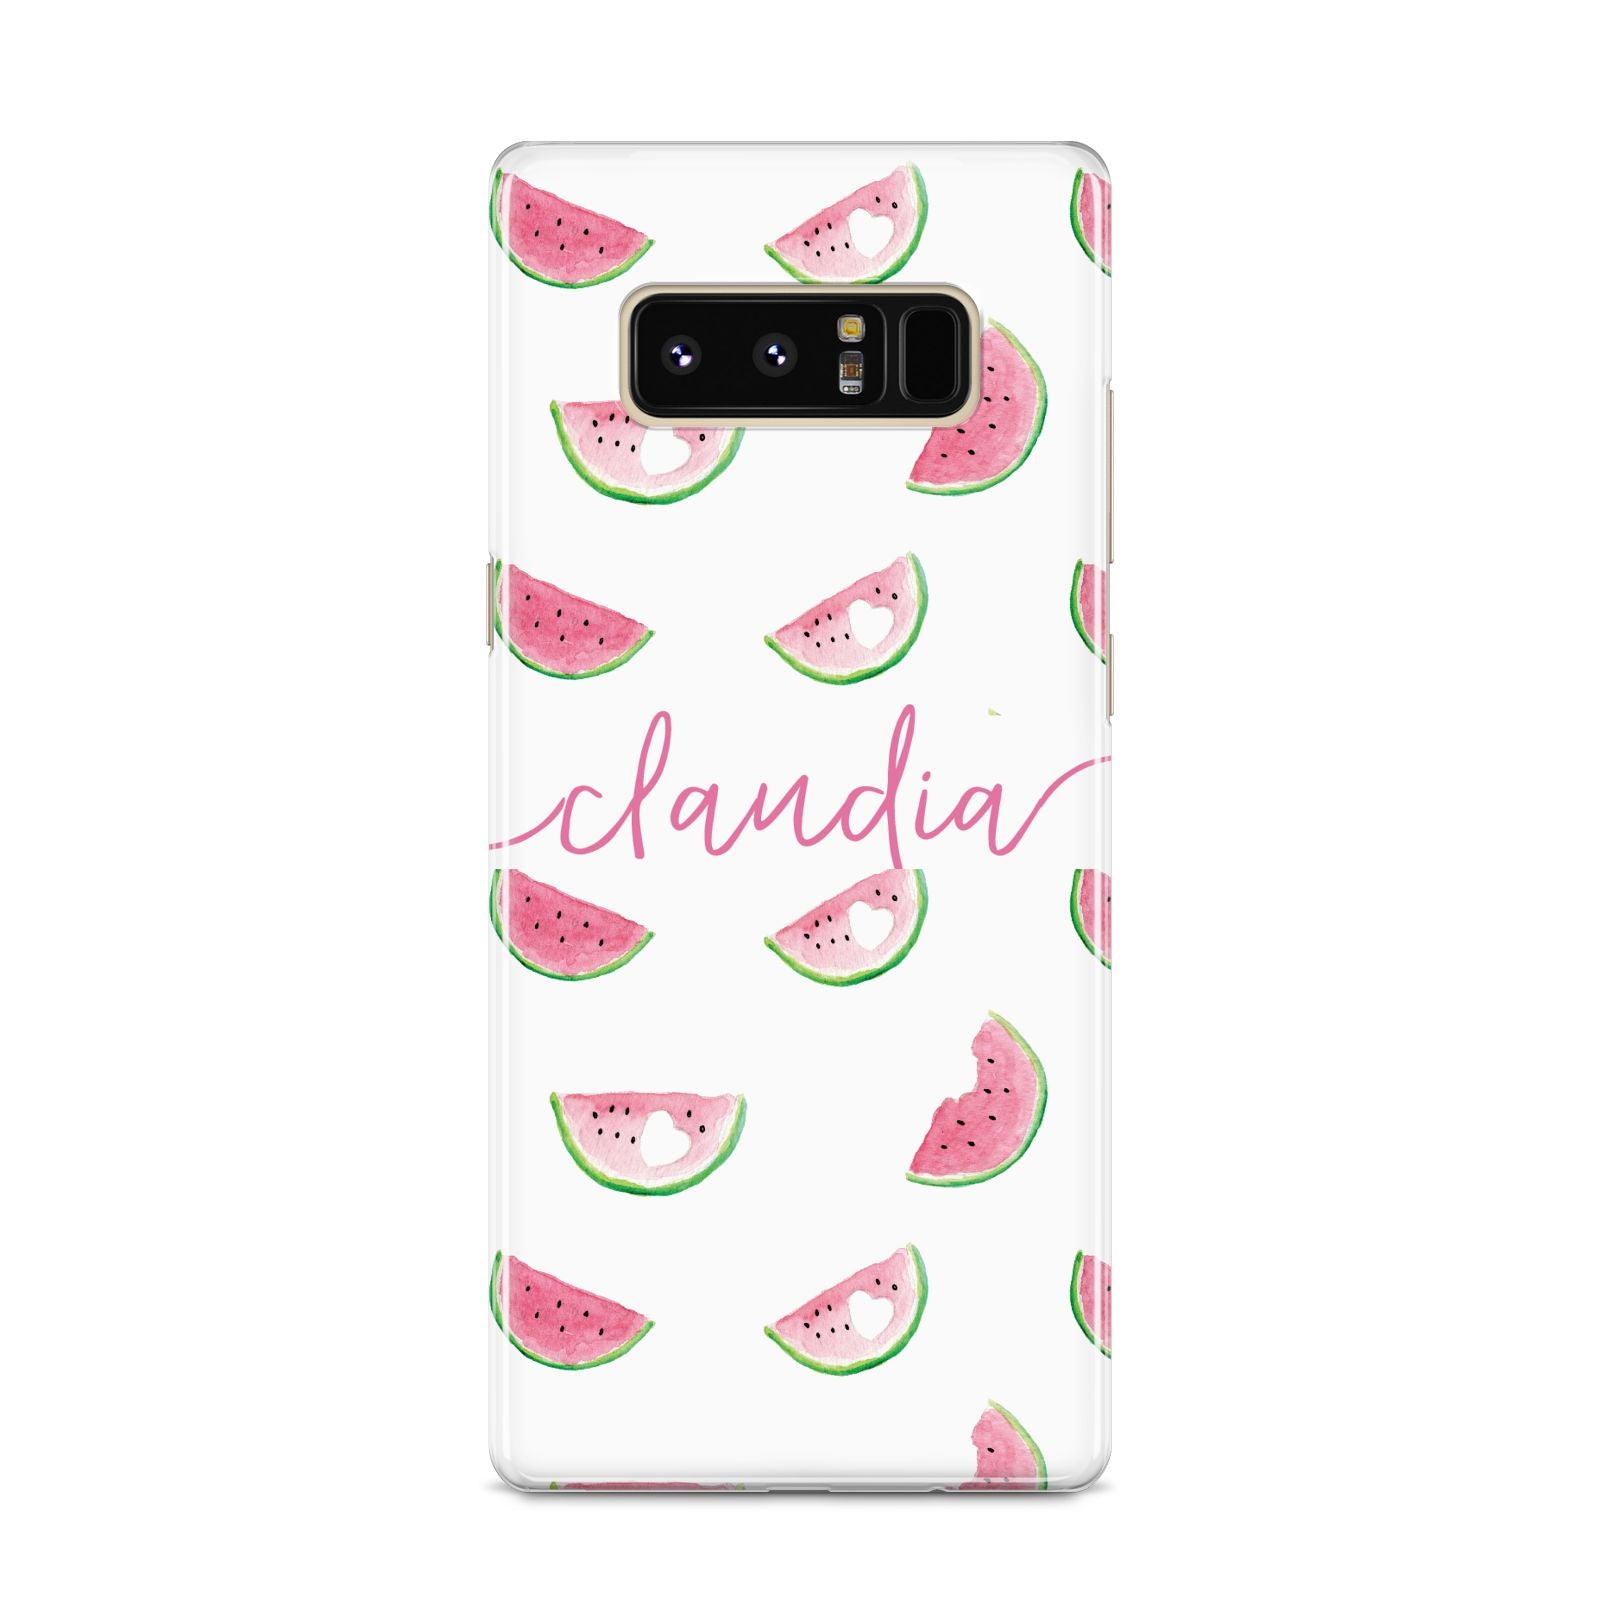 Personalised Transparent Watermelon Samsung Galaxy S8 Case